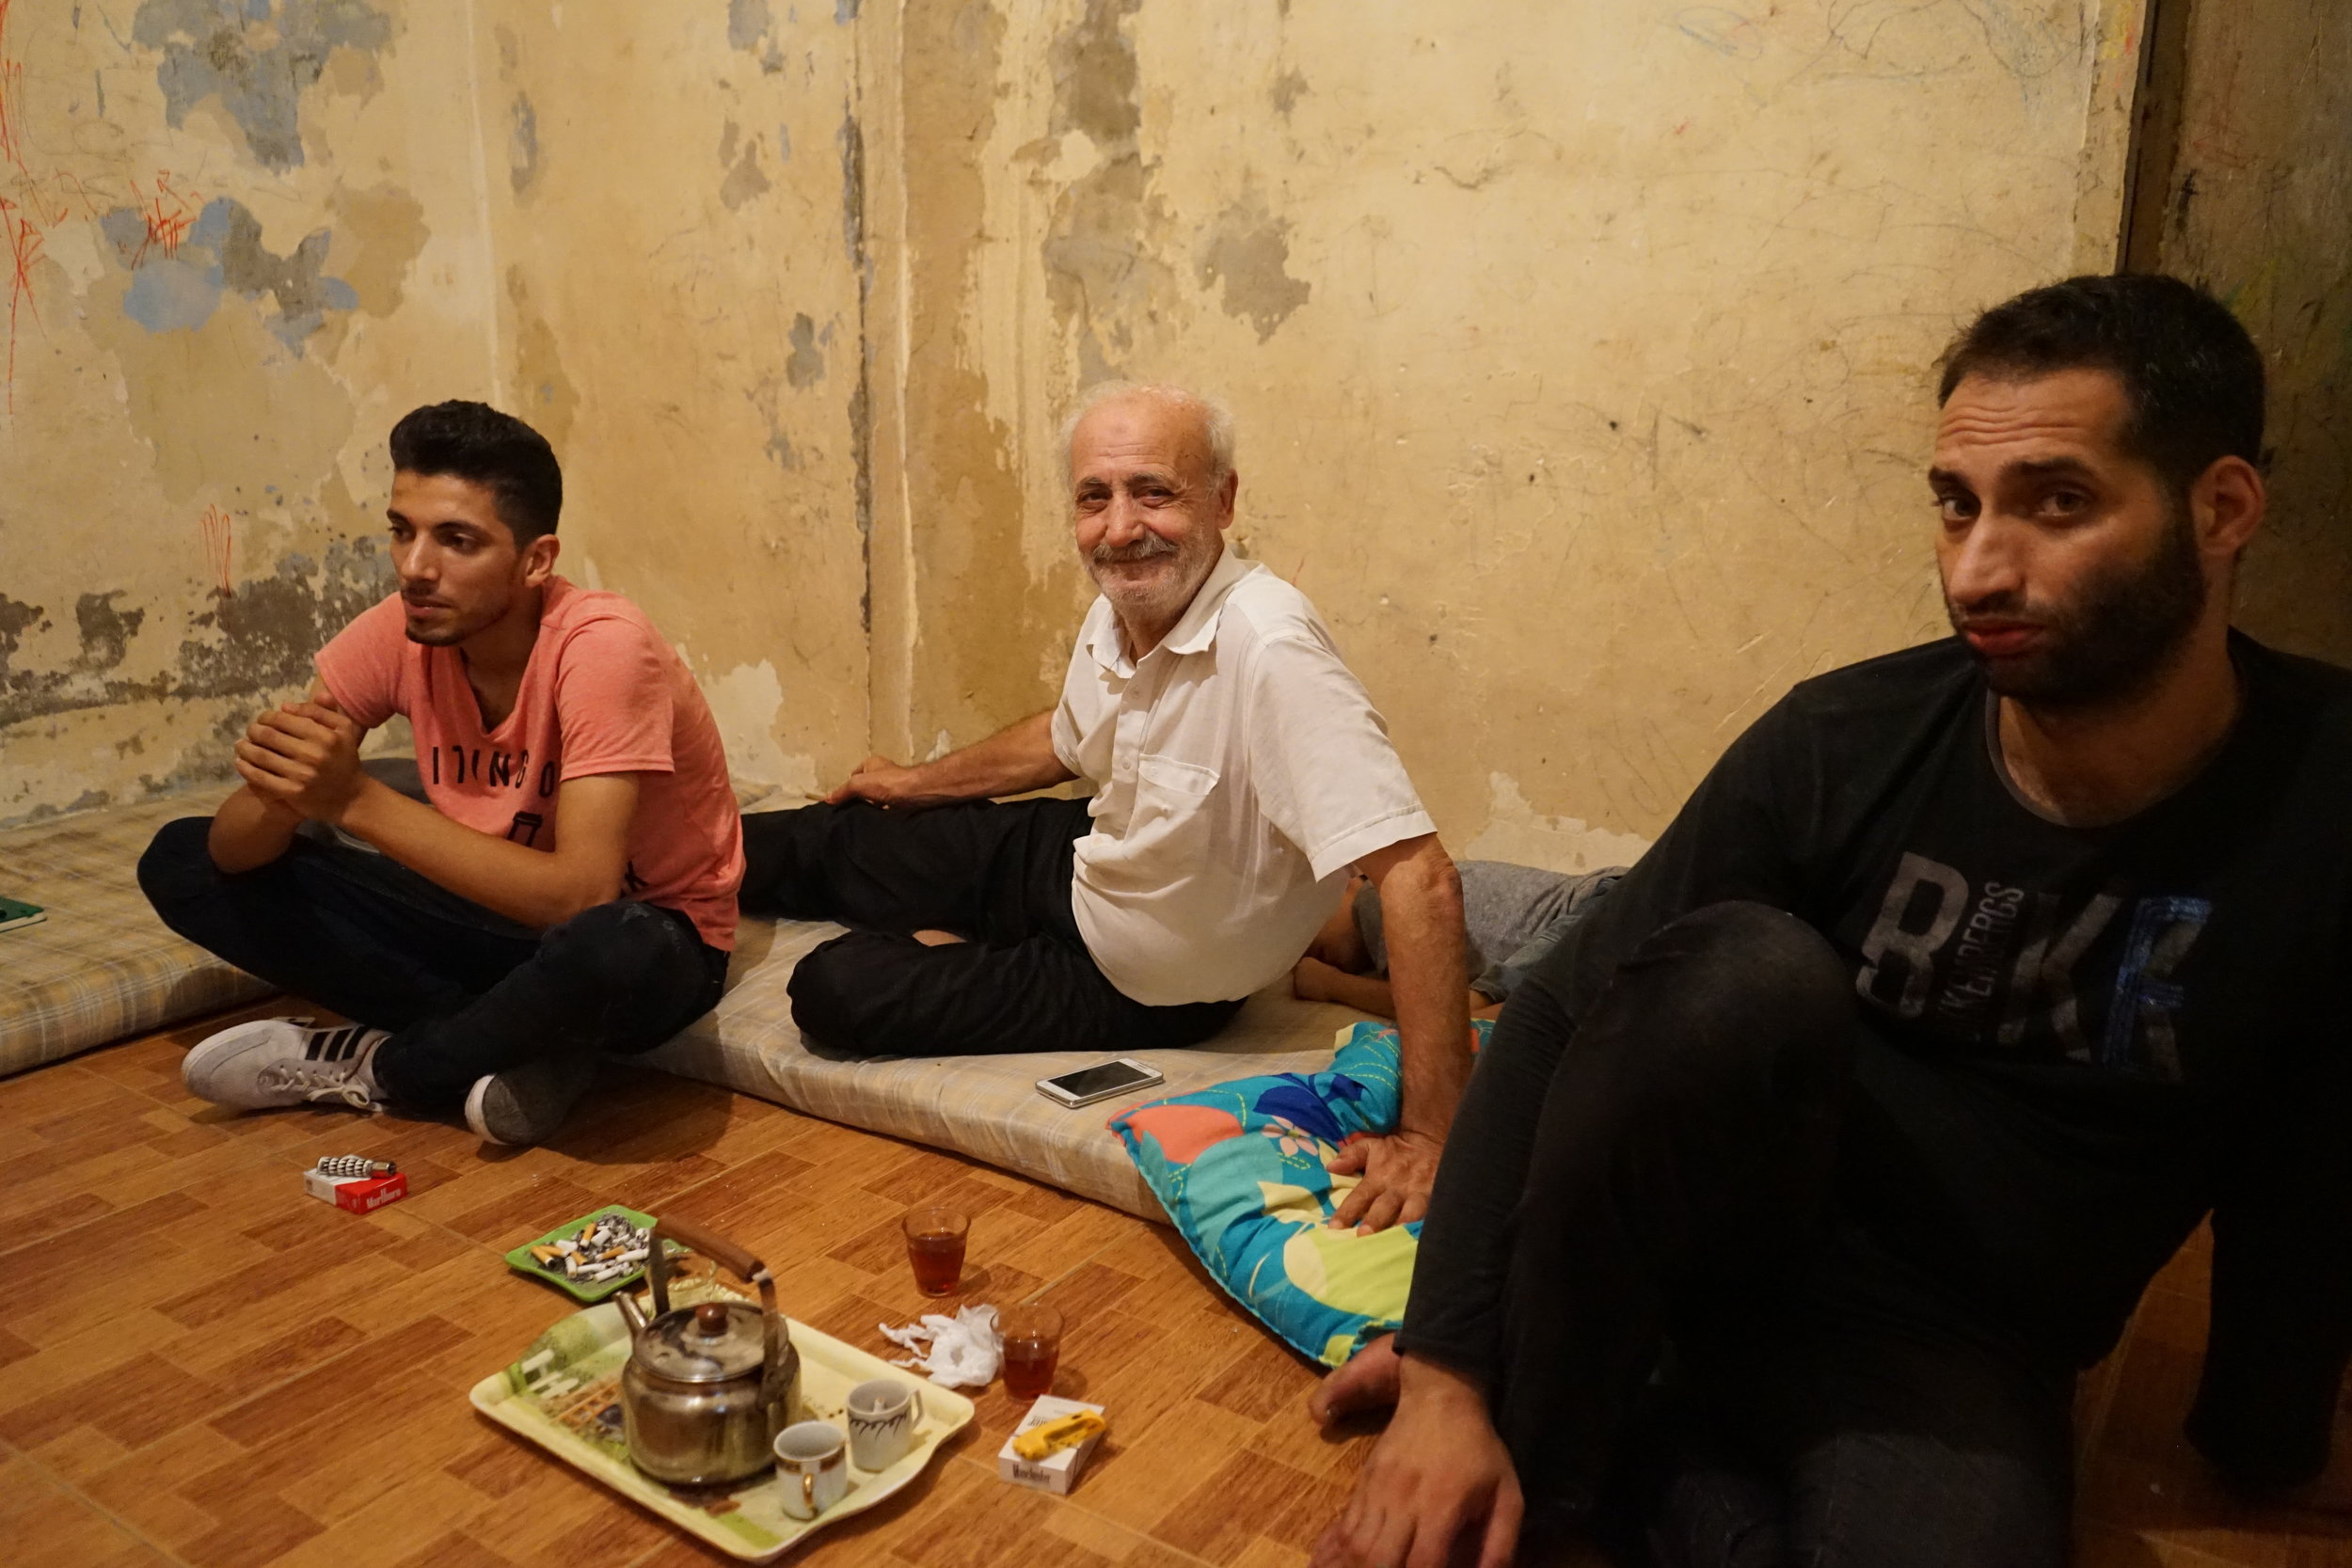  Al Hassan, Ghanam and Ghanam's son (left to right) sit in Ghanam's home in Sabra and Shatila on August 17, 2016. 